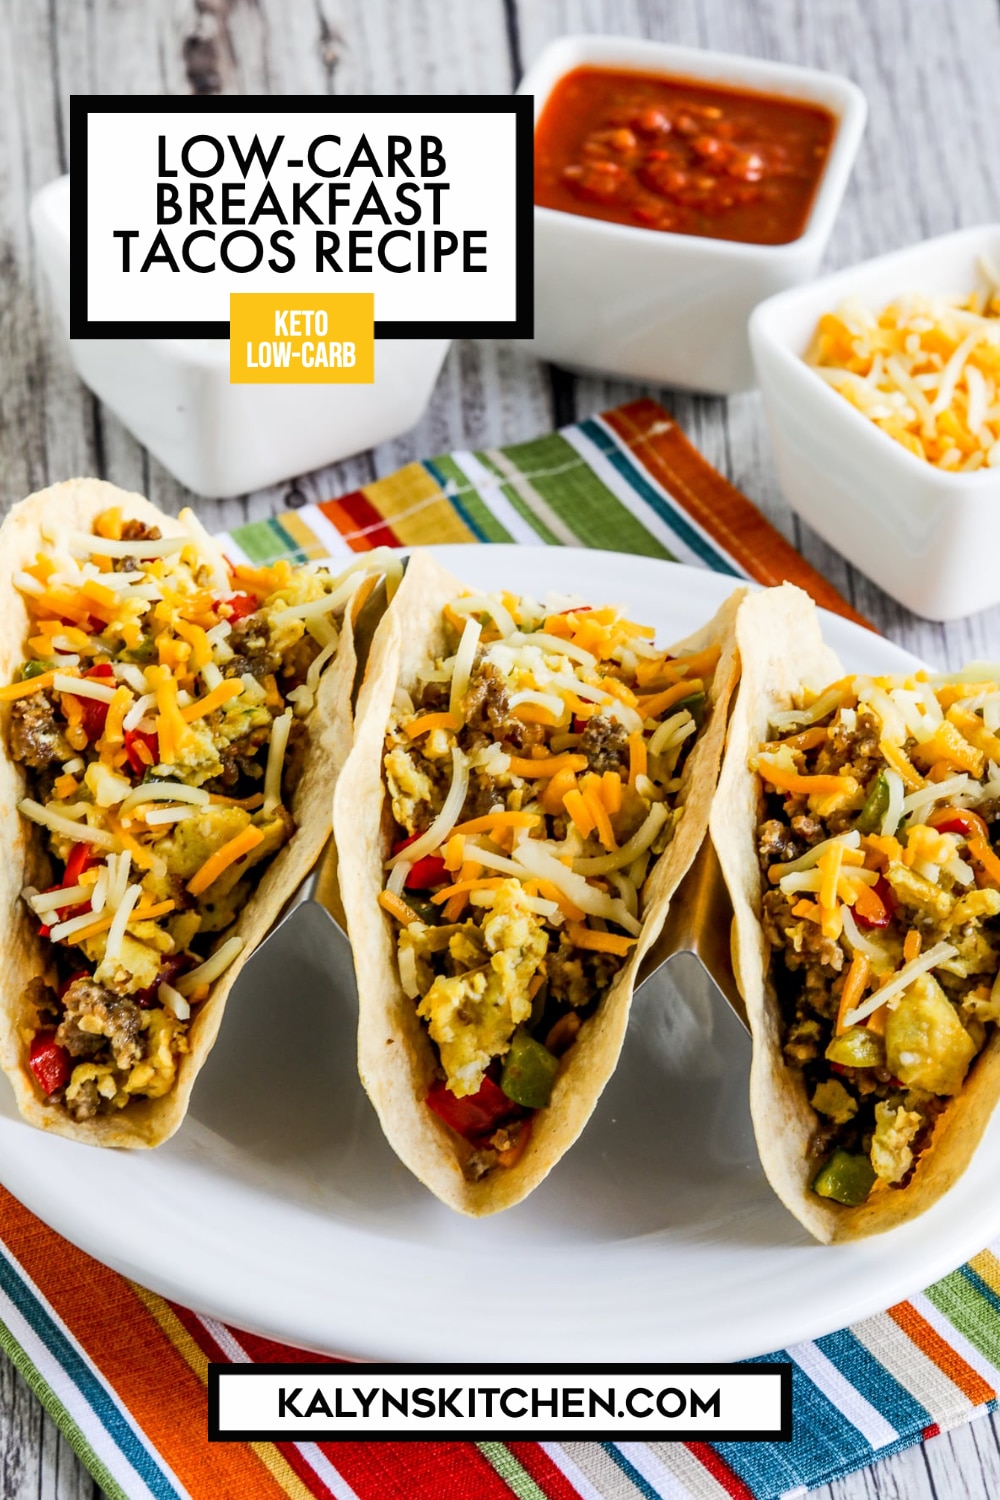 Pinterest image of Low-Carb Breakfast Tacos Recipe